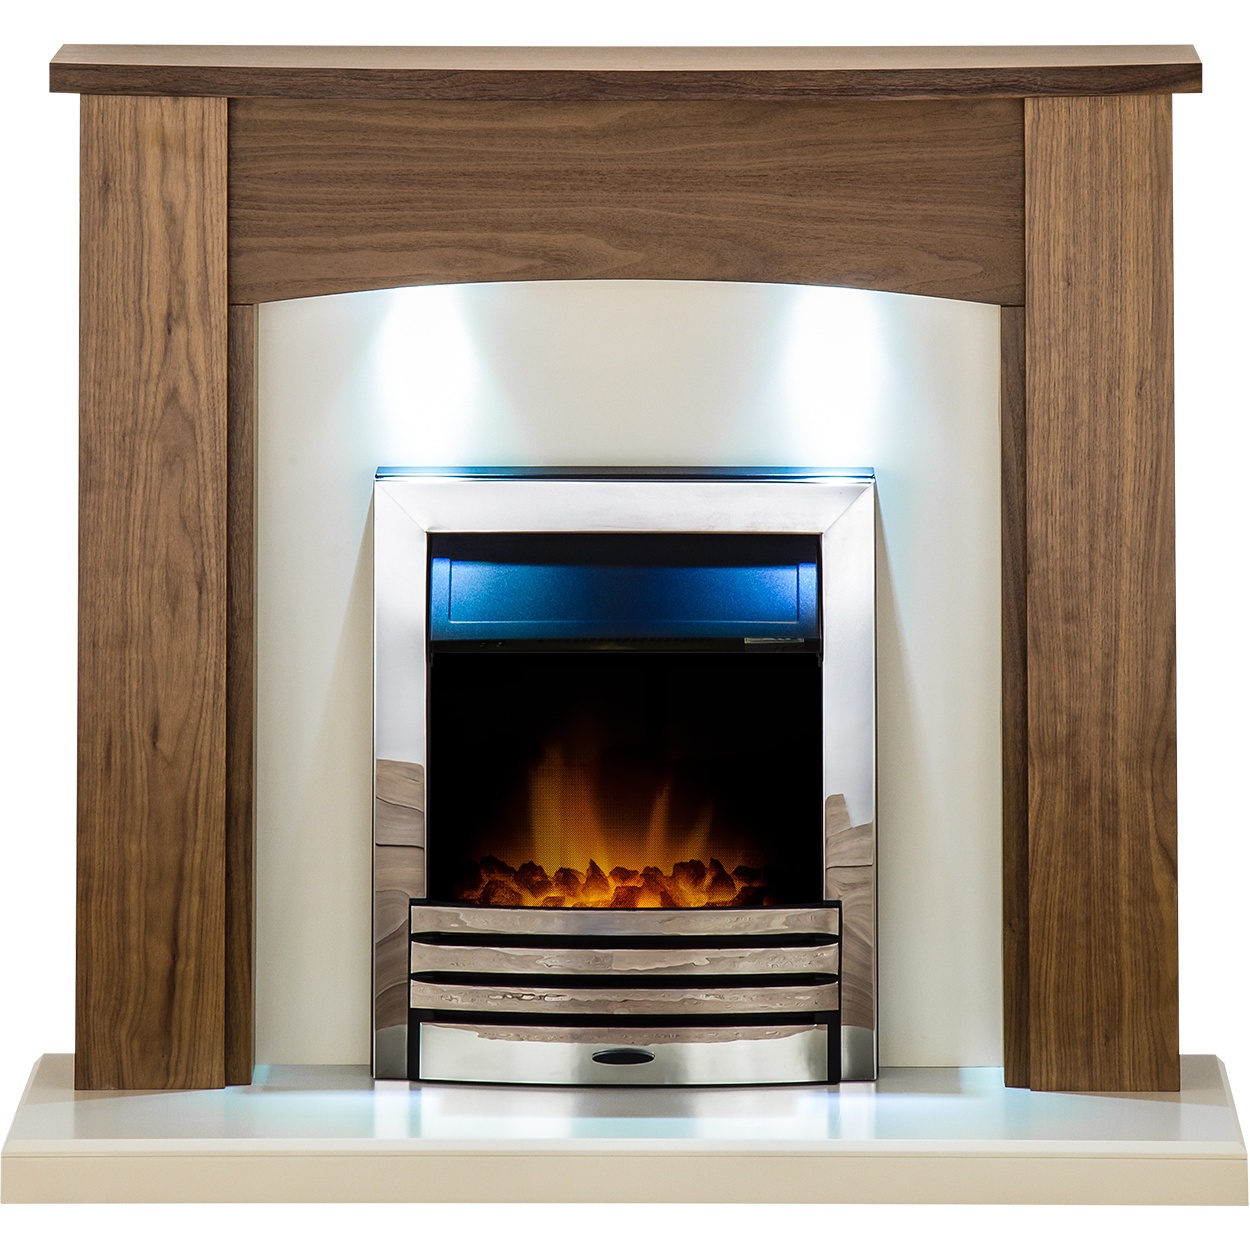 Fireplace Spark Guard New Details About Adam Fireplace Suite Walnut & Eclipse Electric Fire Chrome and Downlights 48"